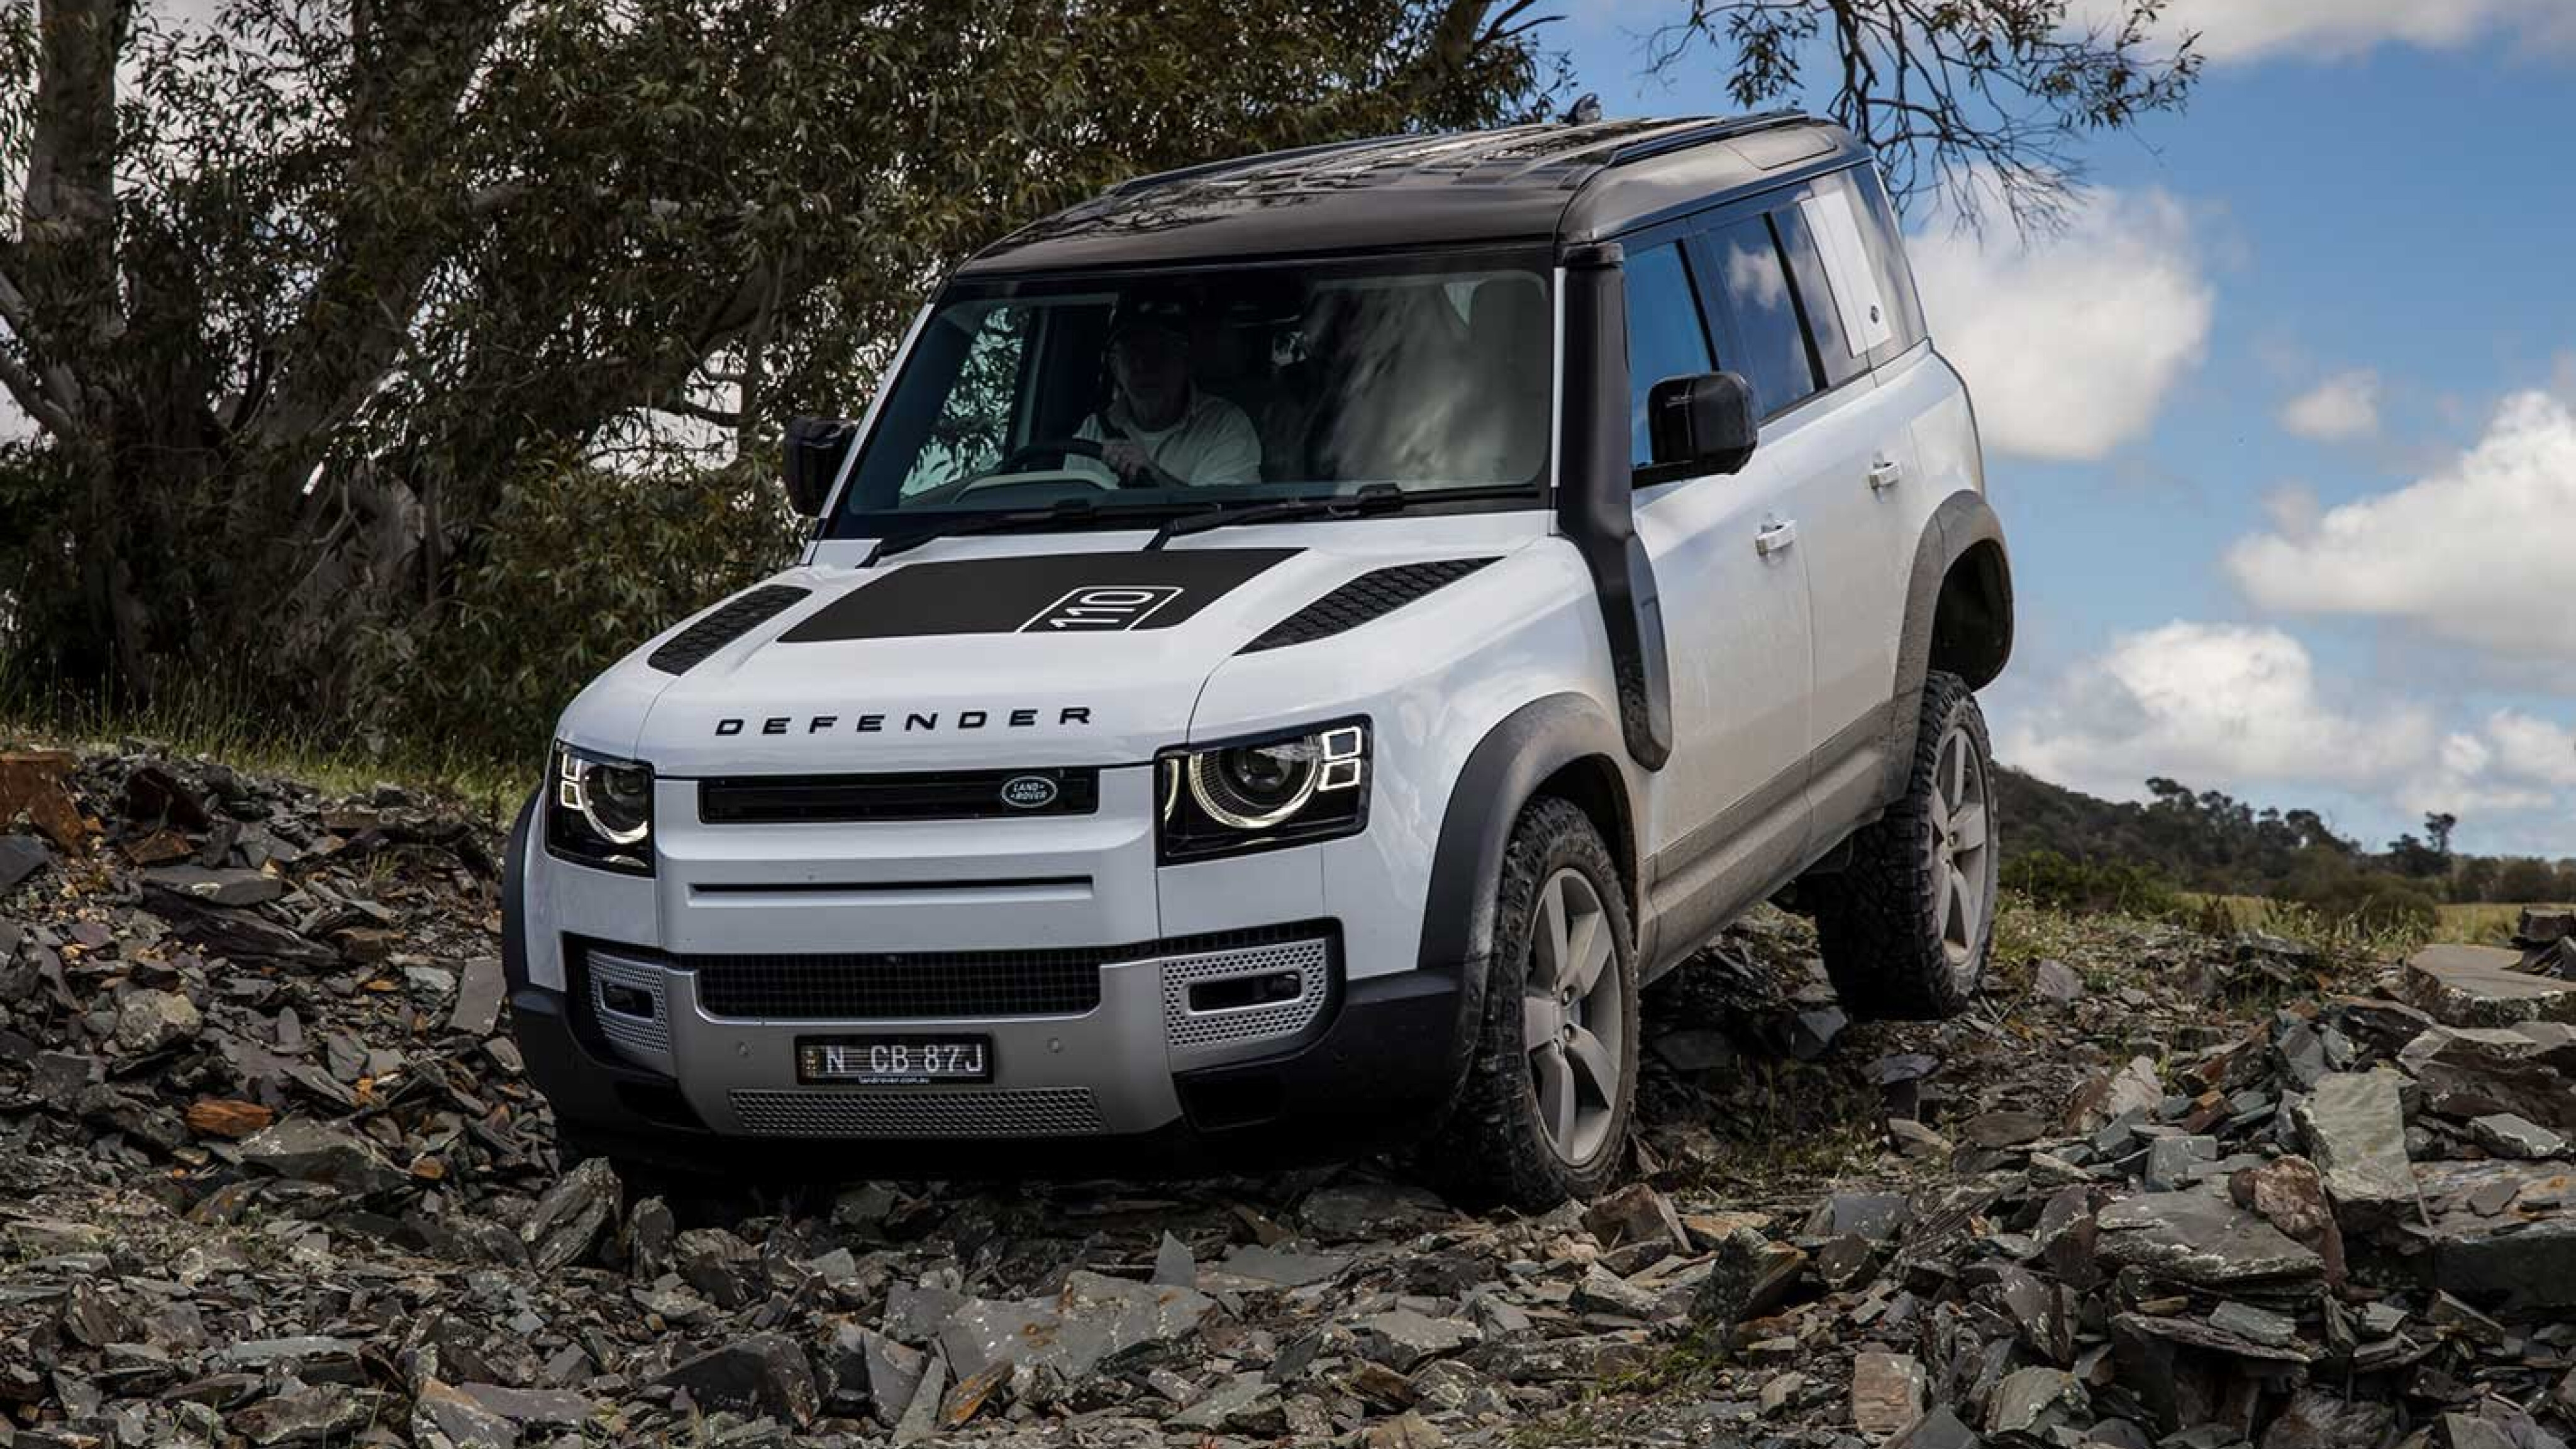 https://assets.whichcar.com.au/image/upload/s--NhYUzUKJ--/c_fill,f_auto,q_auto:good/t_p_16x9/v1/archive/whichcar/2020/12/22/-1/Land-Rover-Defender-2.jpg